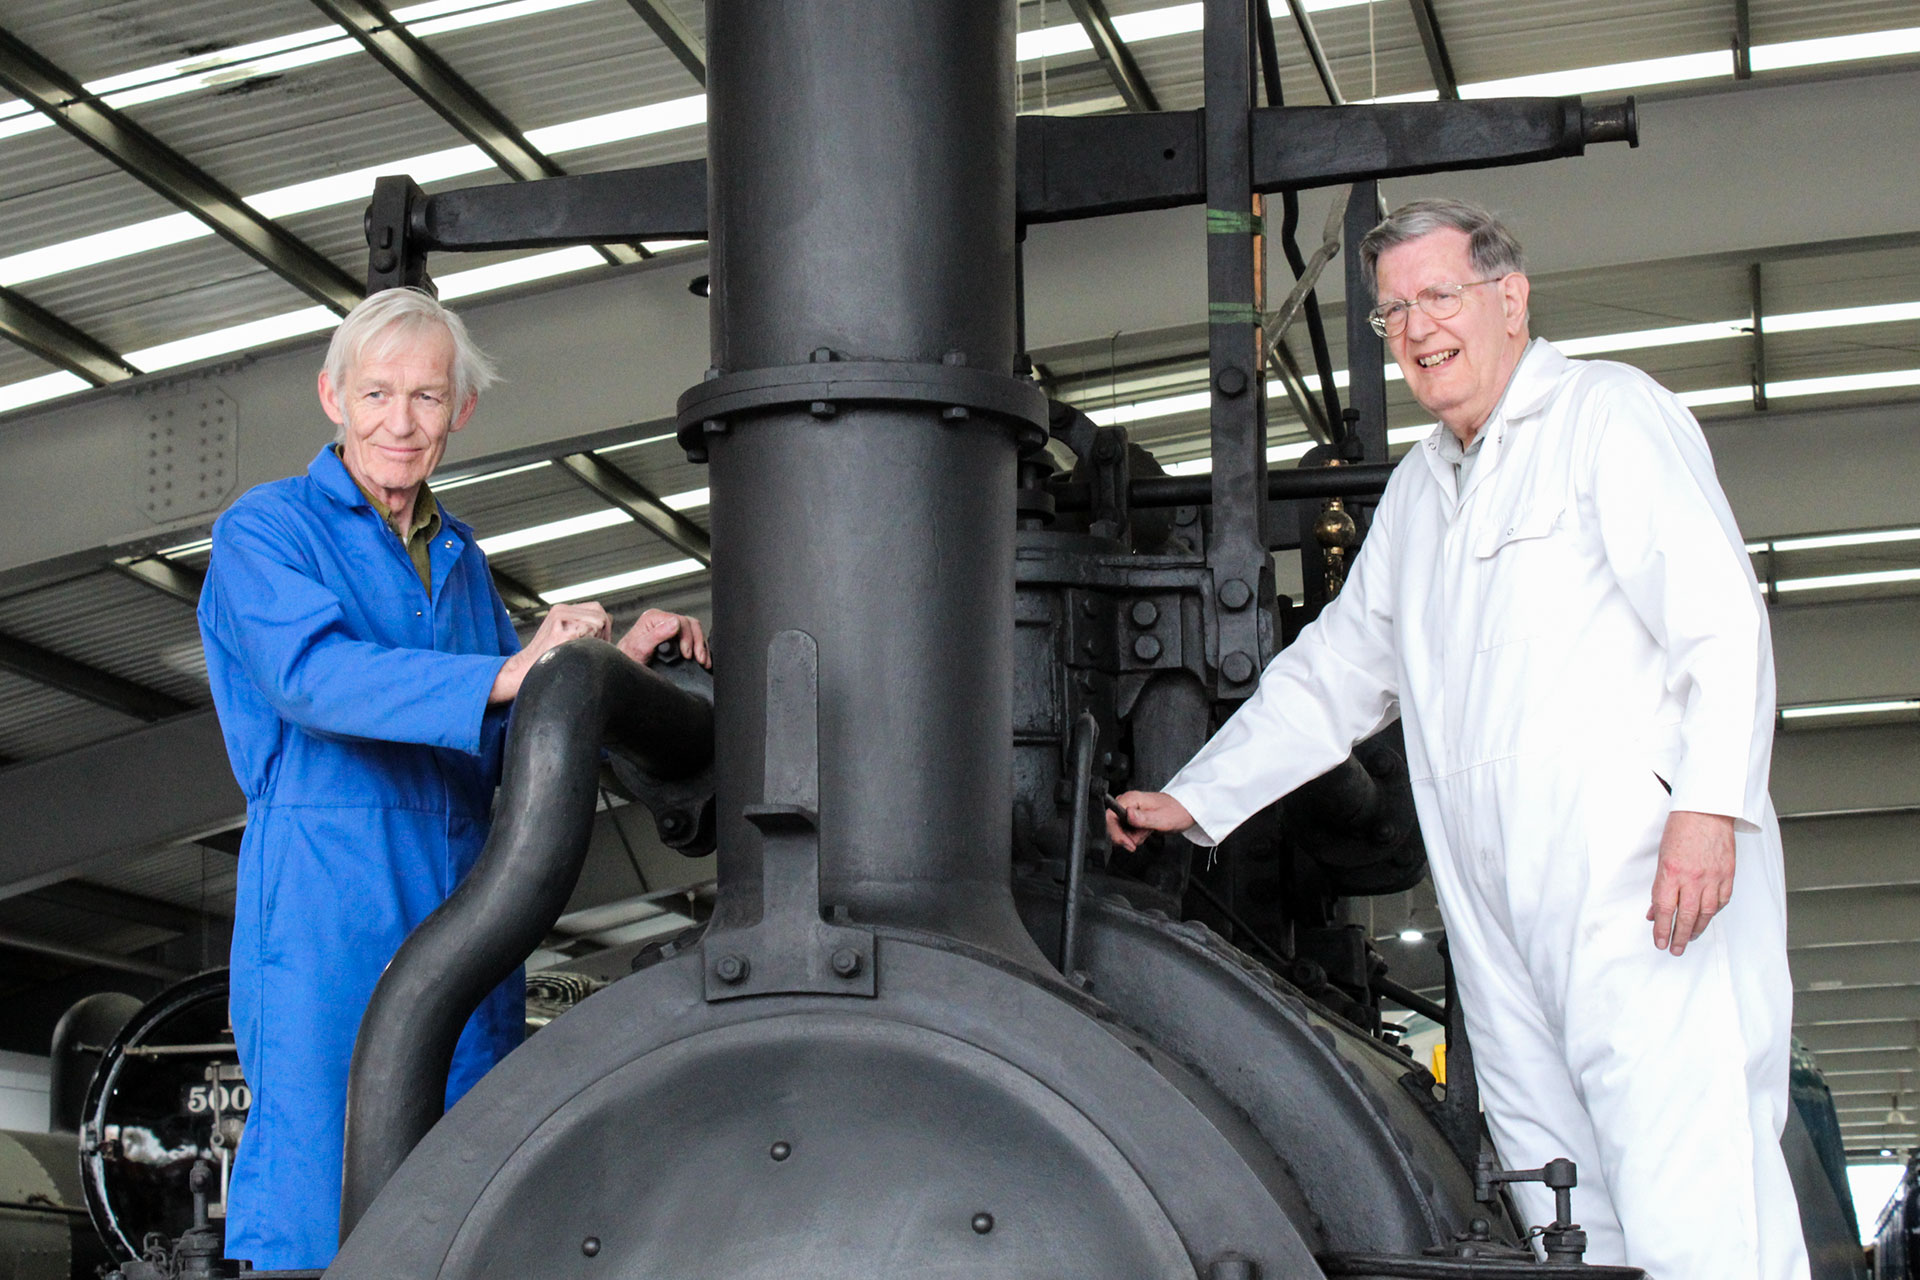 Peter Davidson & Dr. Michael Bailey with the Hetton Locomotive